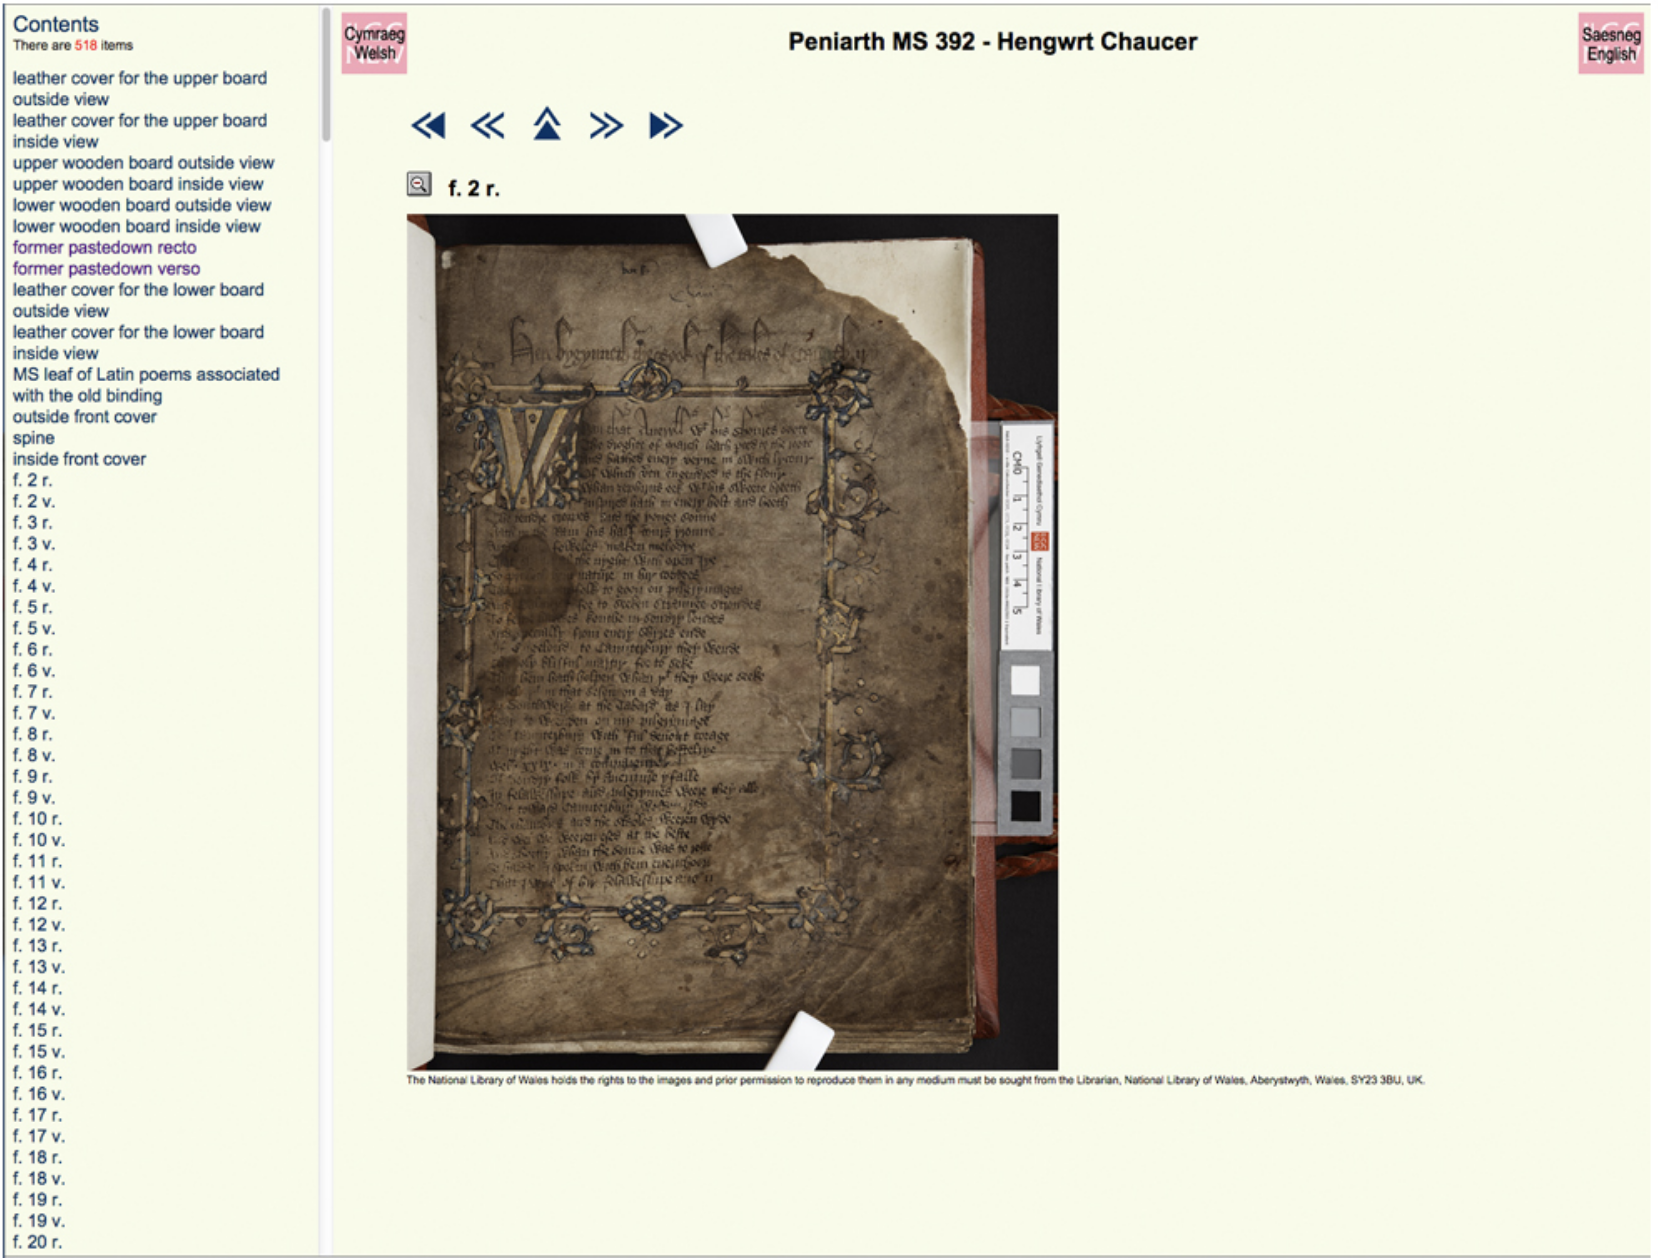 Image of a historical digital viewer